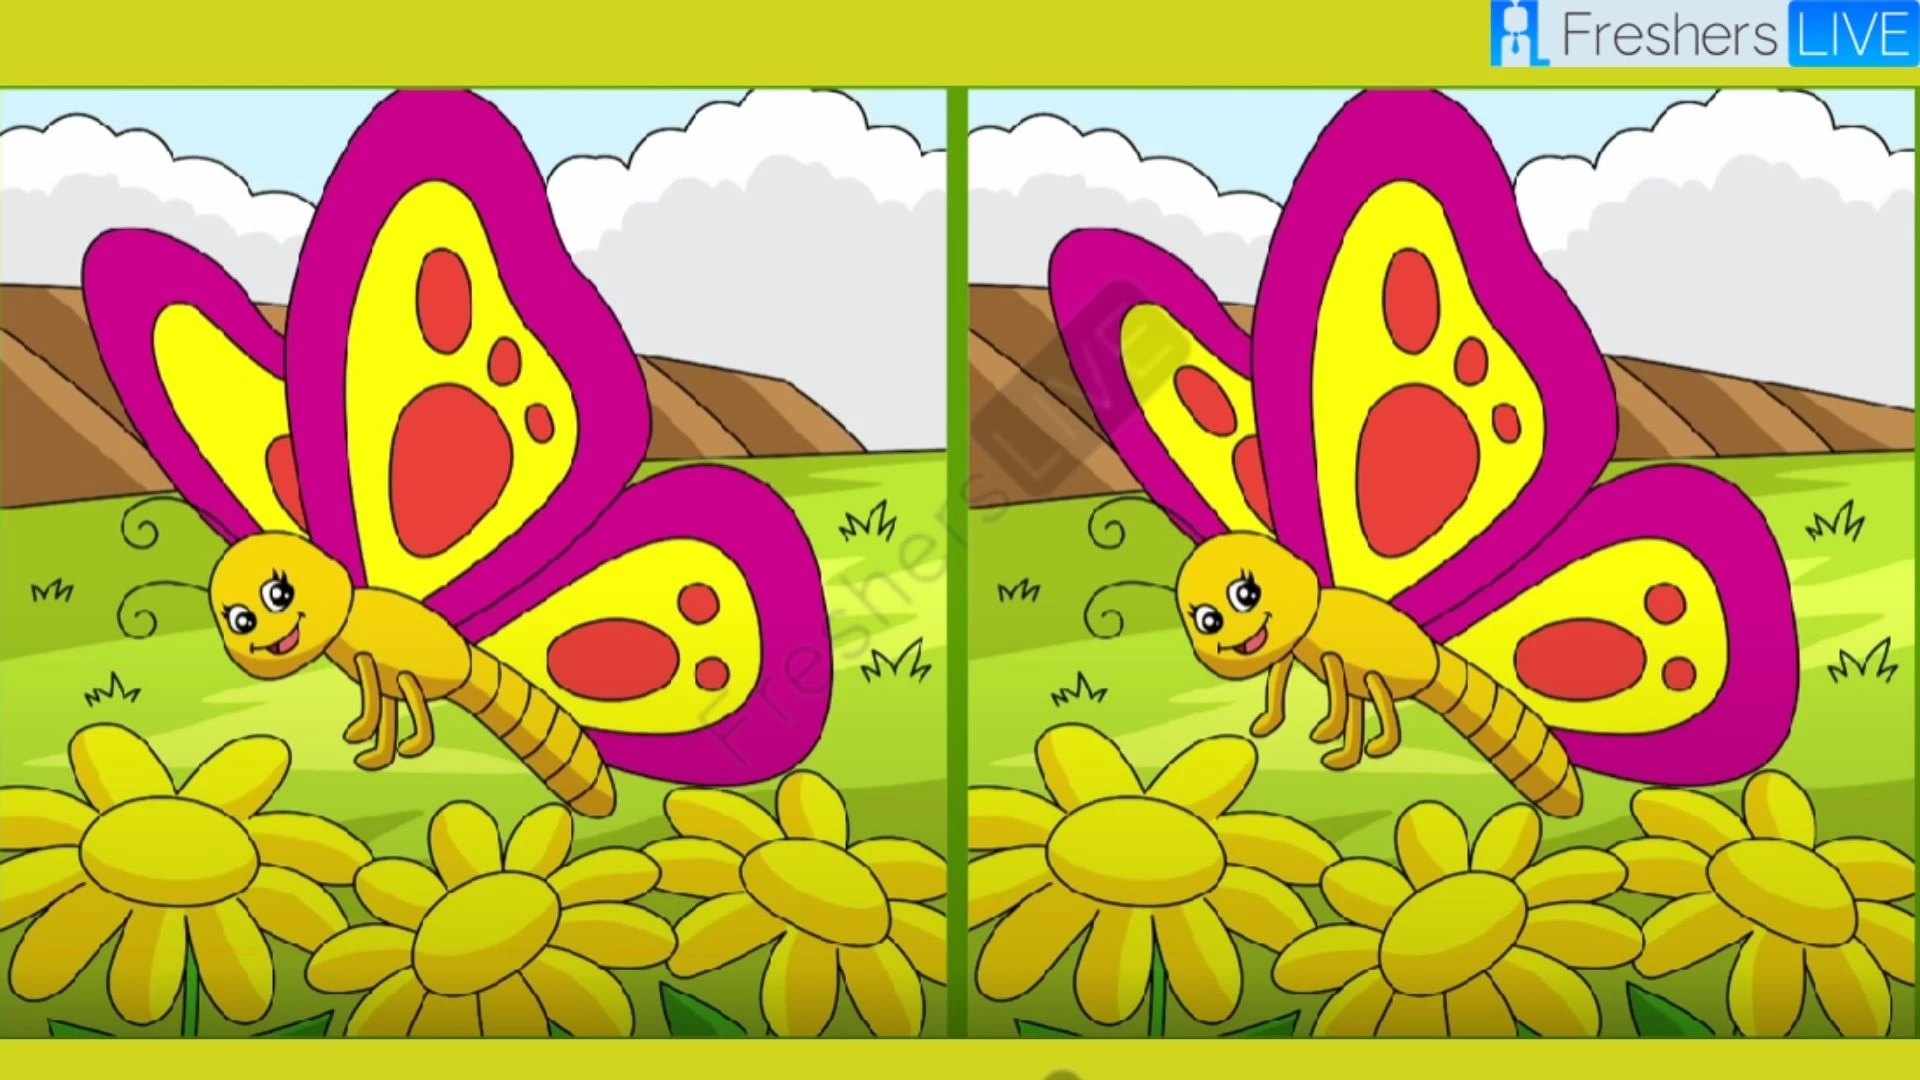 Spot the 3 Differences in the Butterfly Pictures - Test Your Observation Skills!